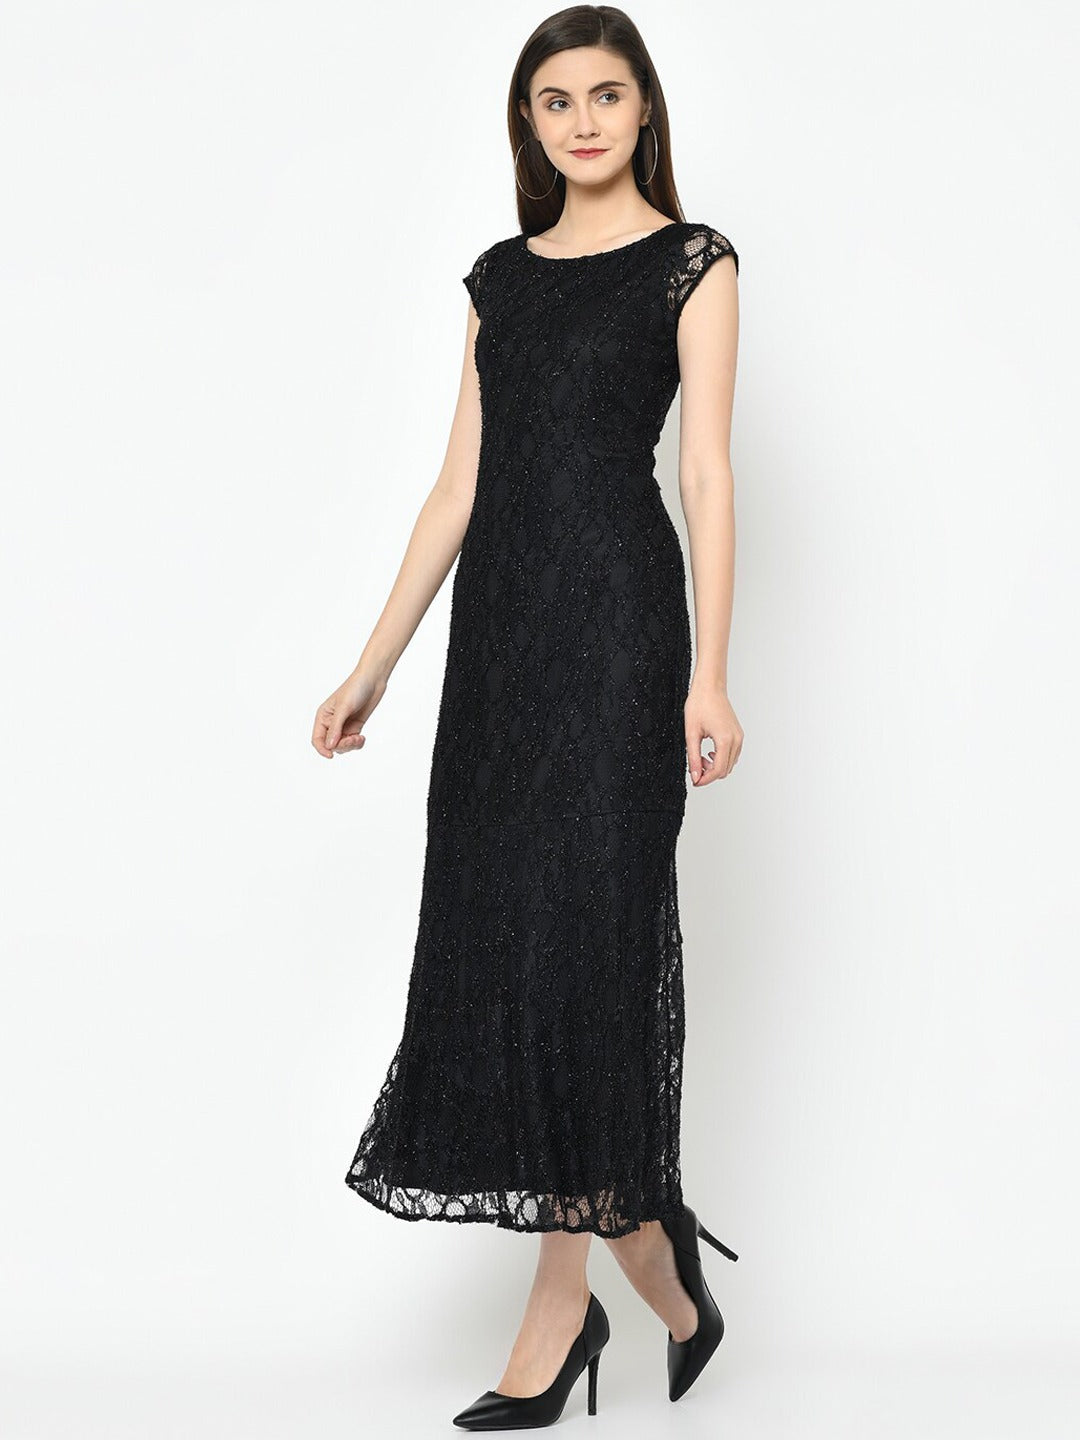 Black ShortSleeves Round Neck Solid Maxi Dress For Party Wear